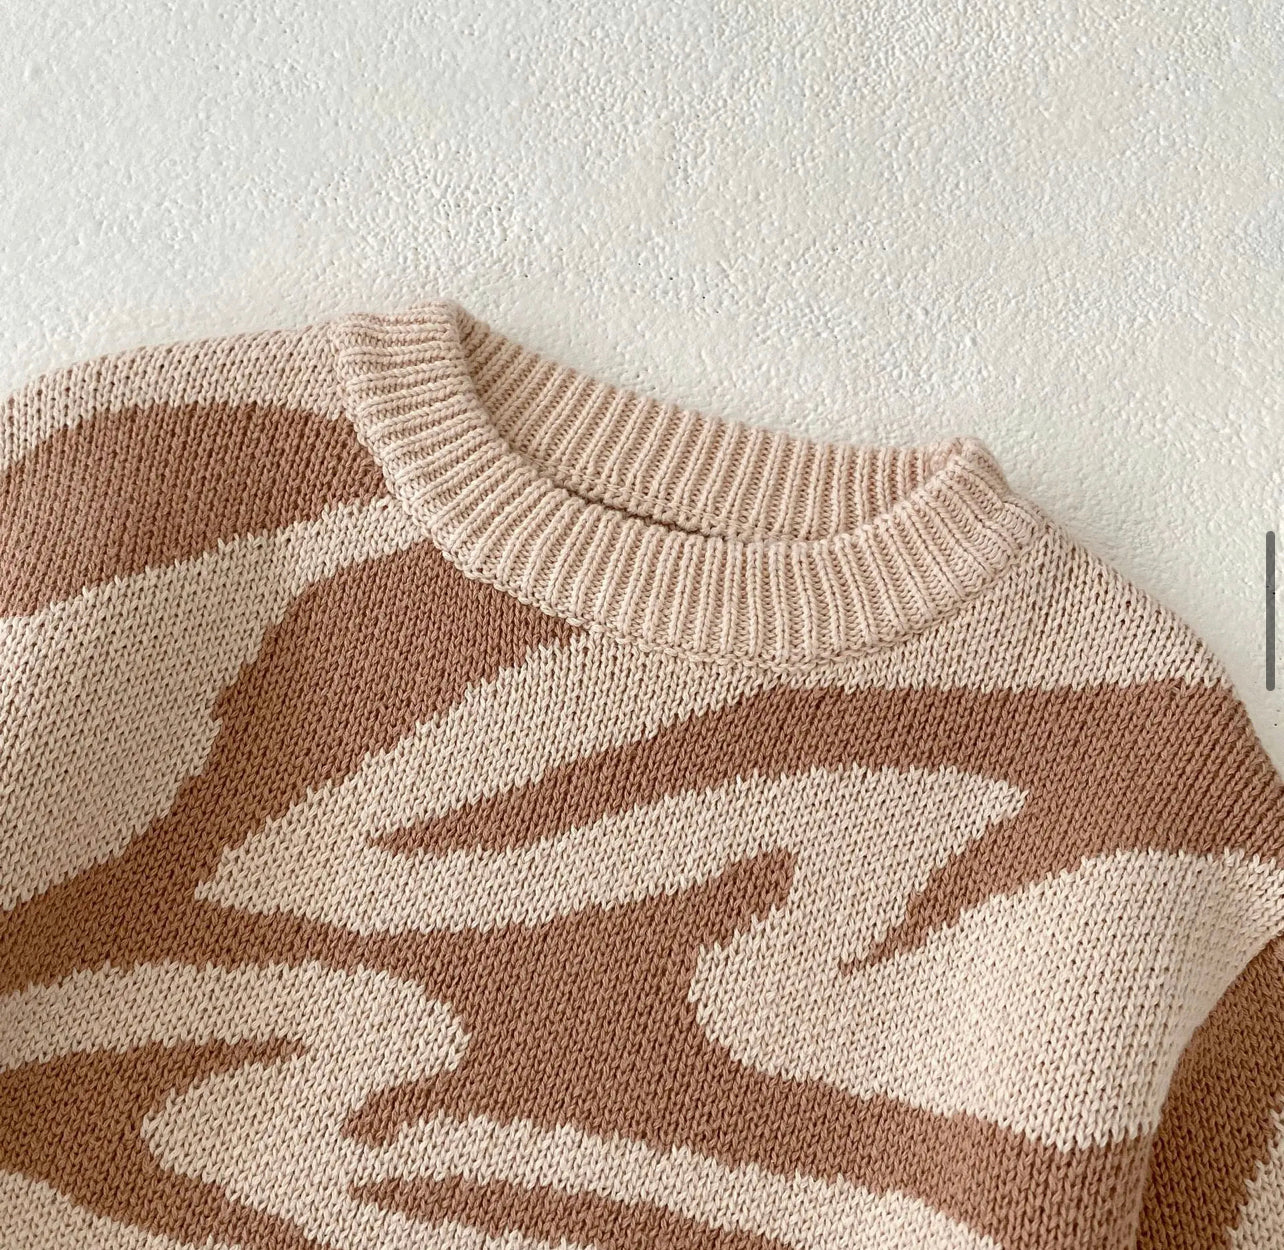 Fall Knitted Sweater